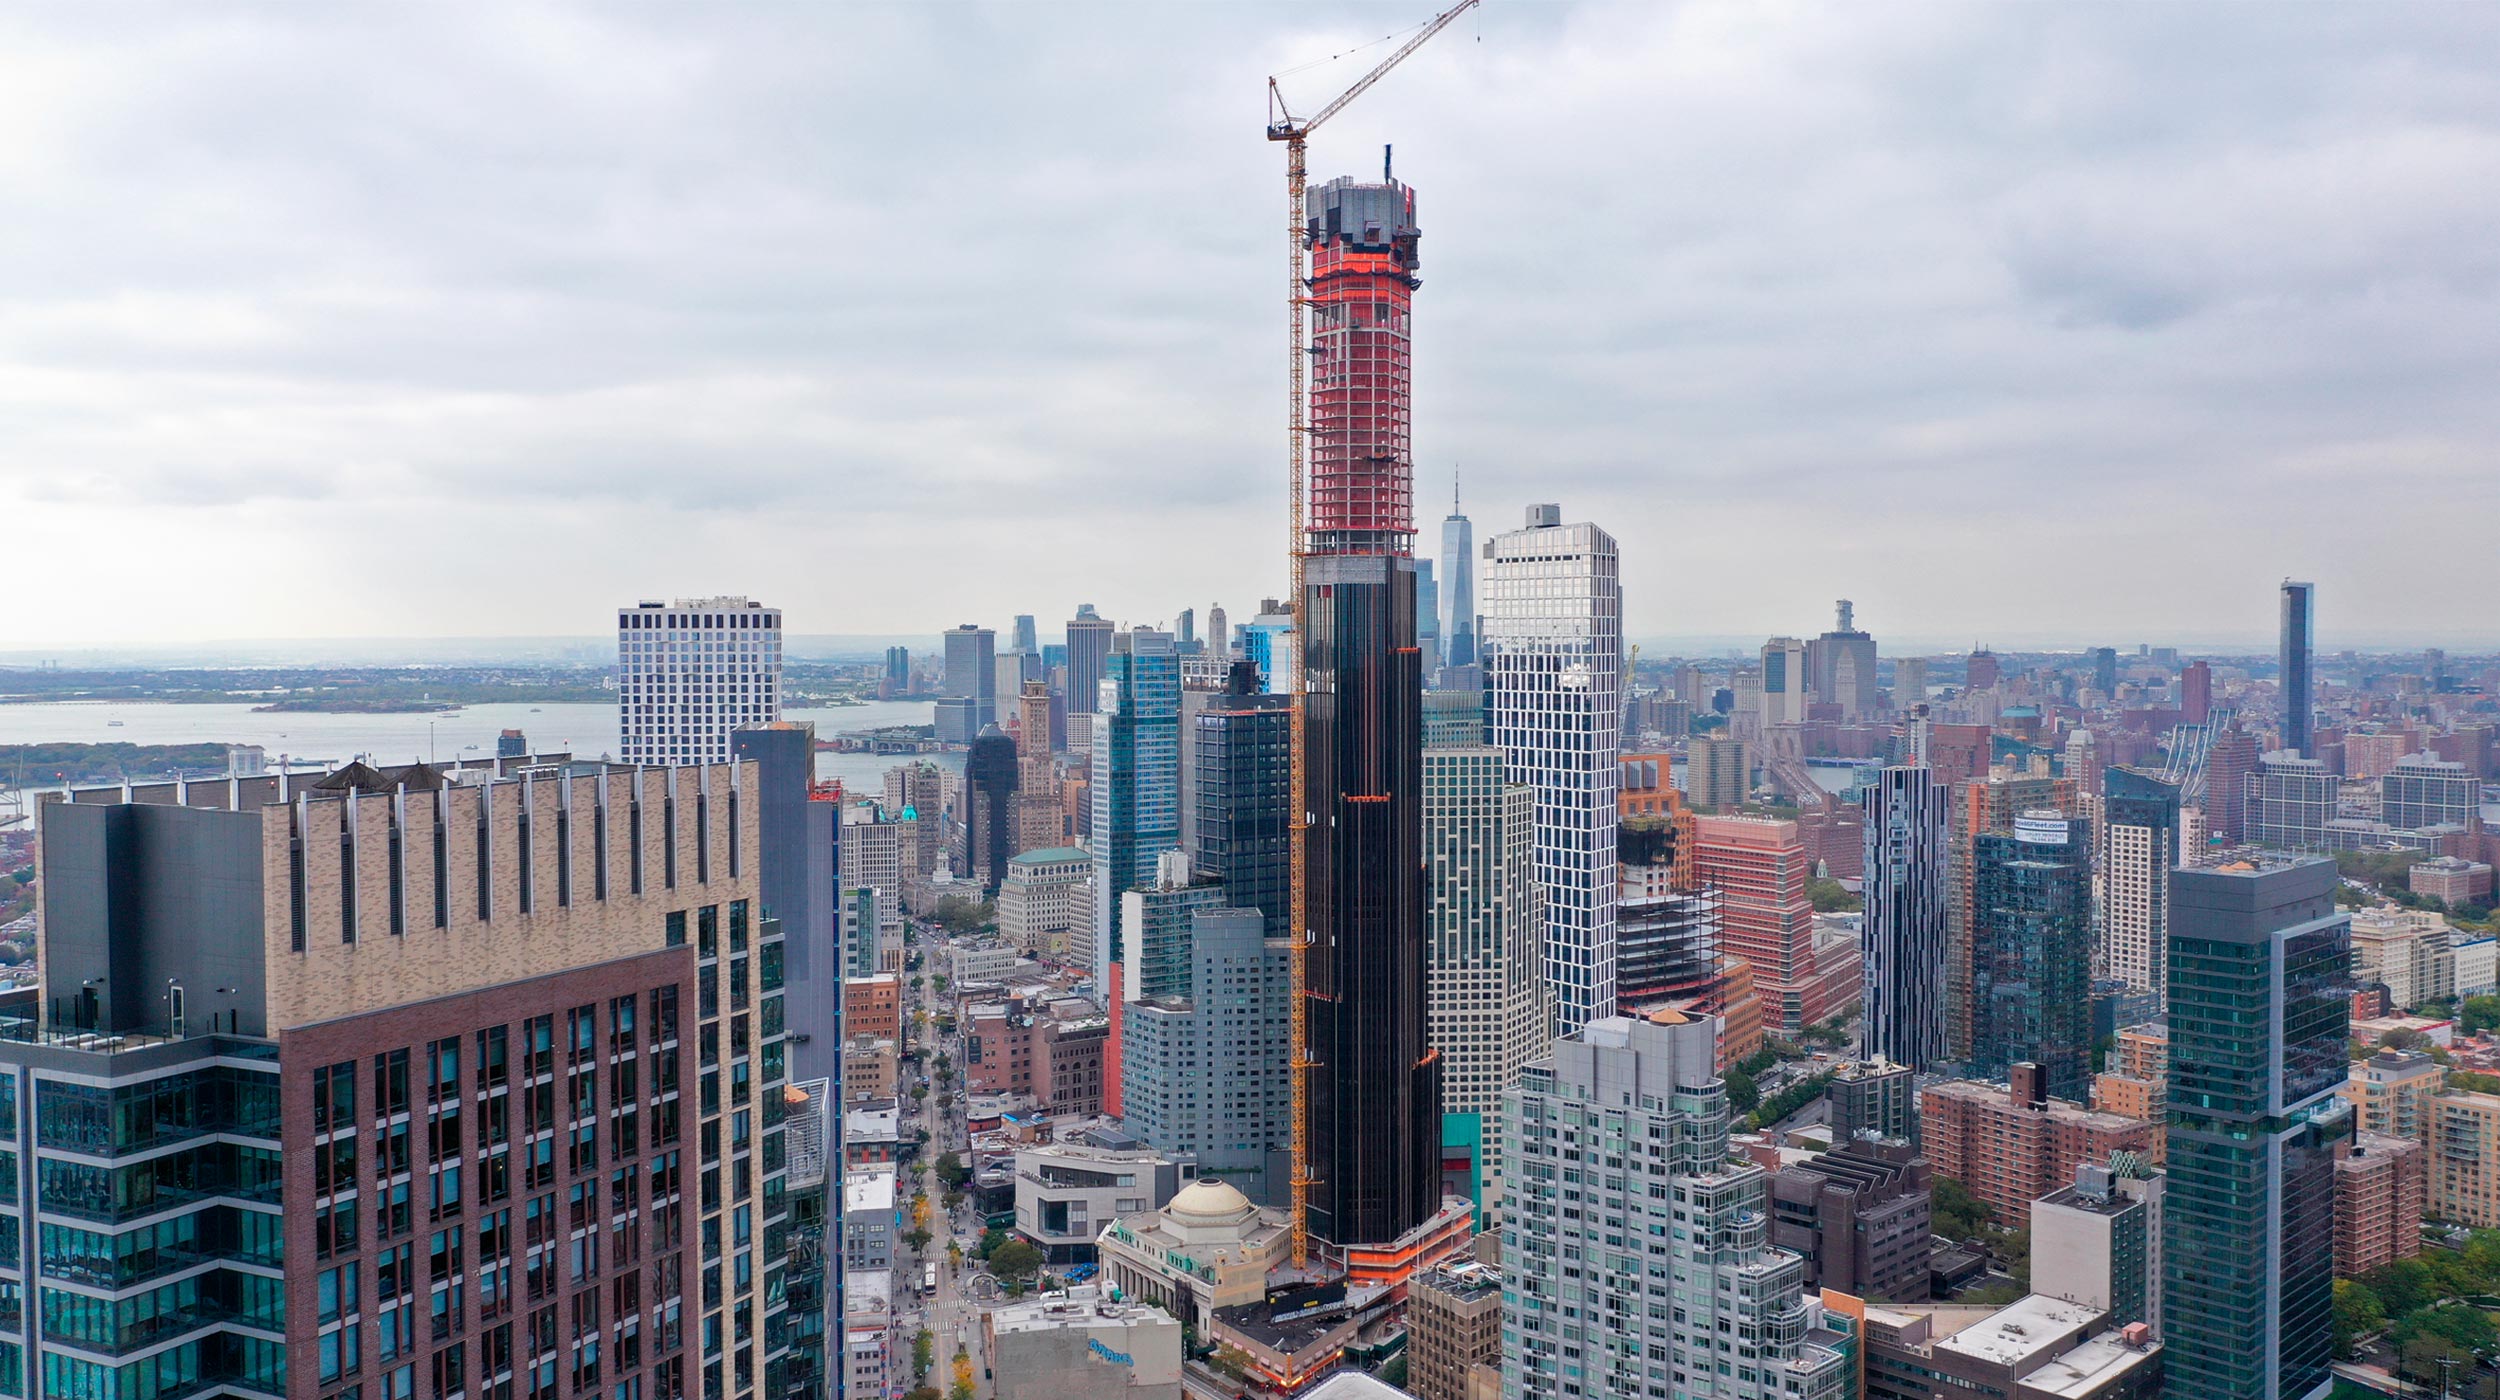 The Brooklyn Tower is a 73 storey tower standing at 325 m, making it the tallest building in Brooklyn. The skyscraper is planned to have over 500 residential units in addition to commercial space.